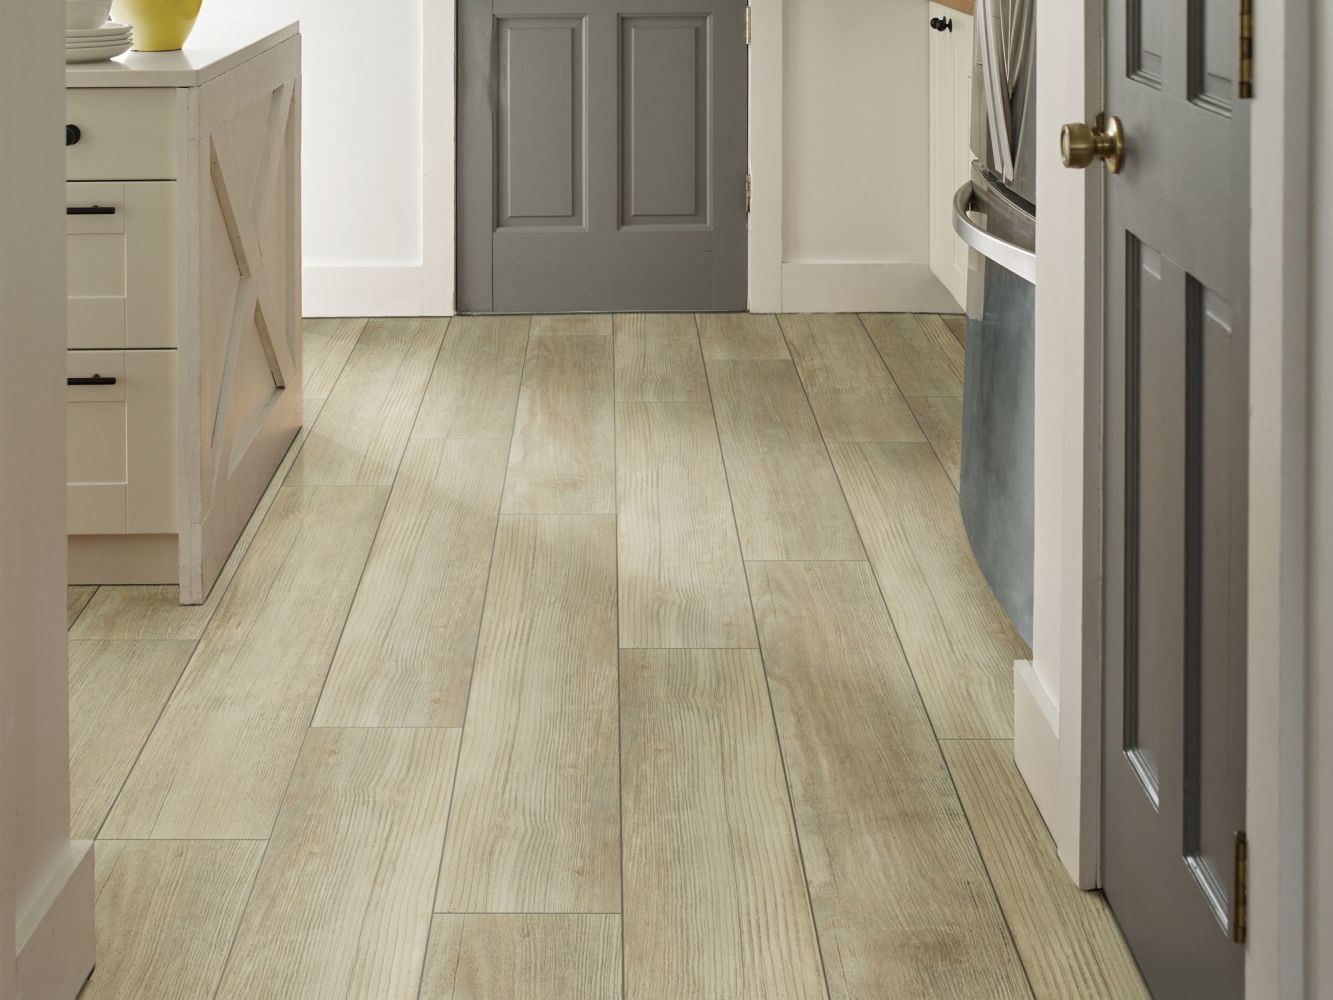 Shaw Floors Resilient Residential Tenacious Hd+ Accent Cypress 00483_3011V